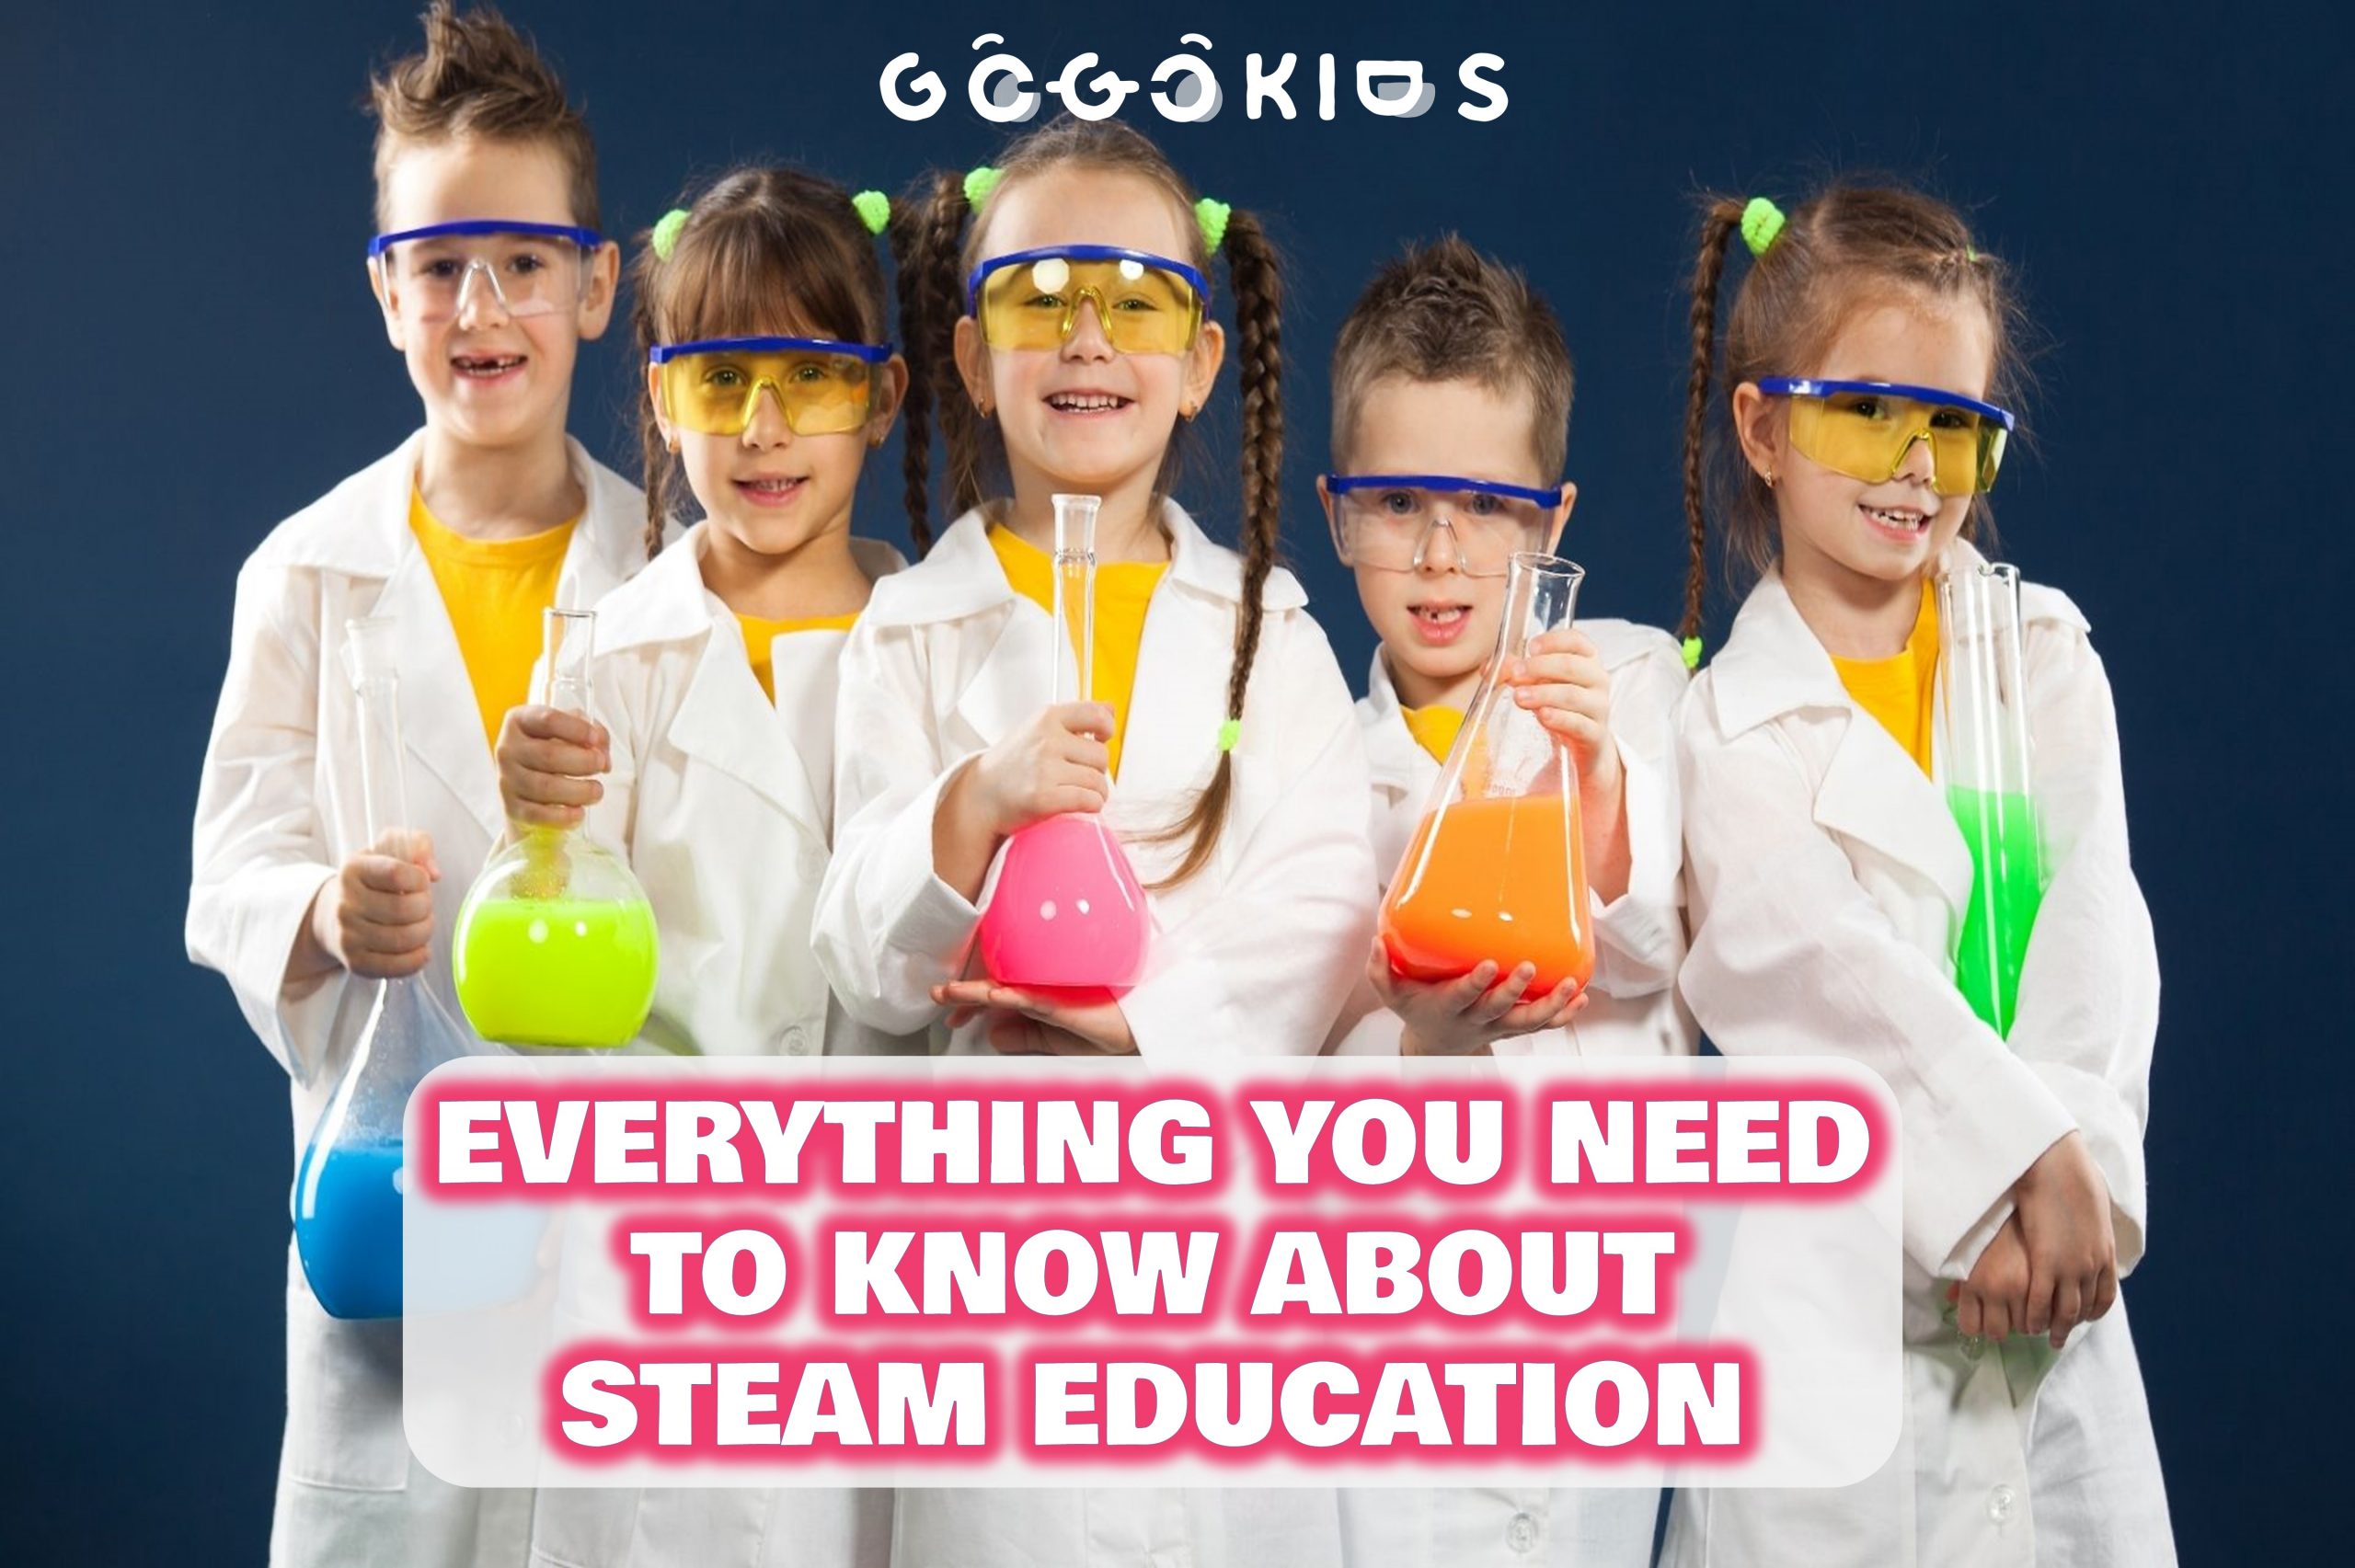 Everything You Need to Know About STEAM Education